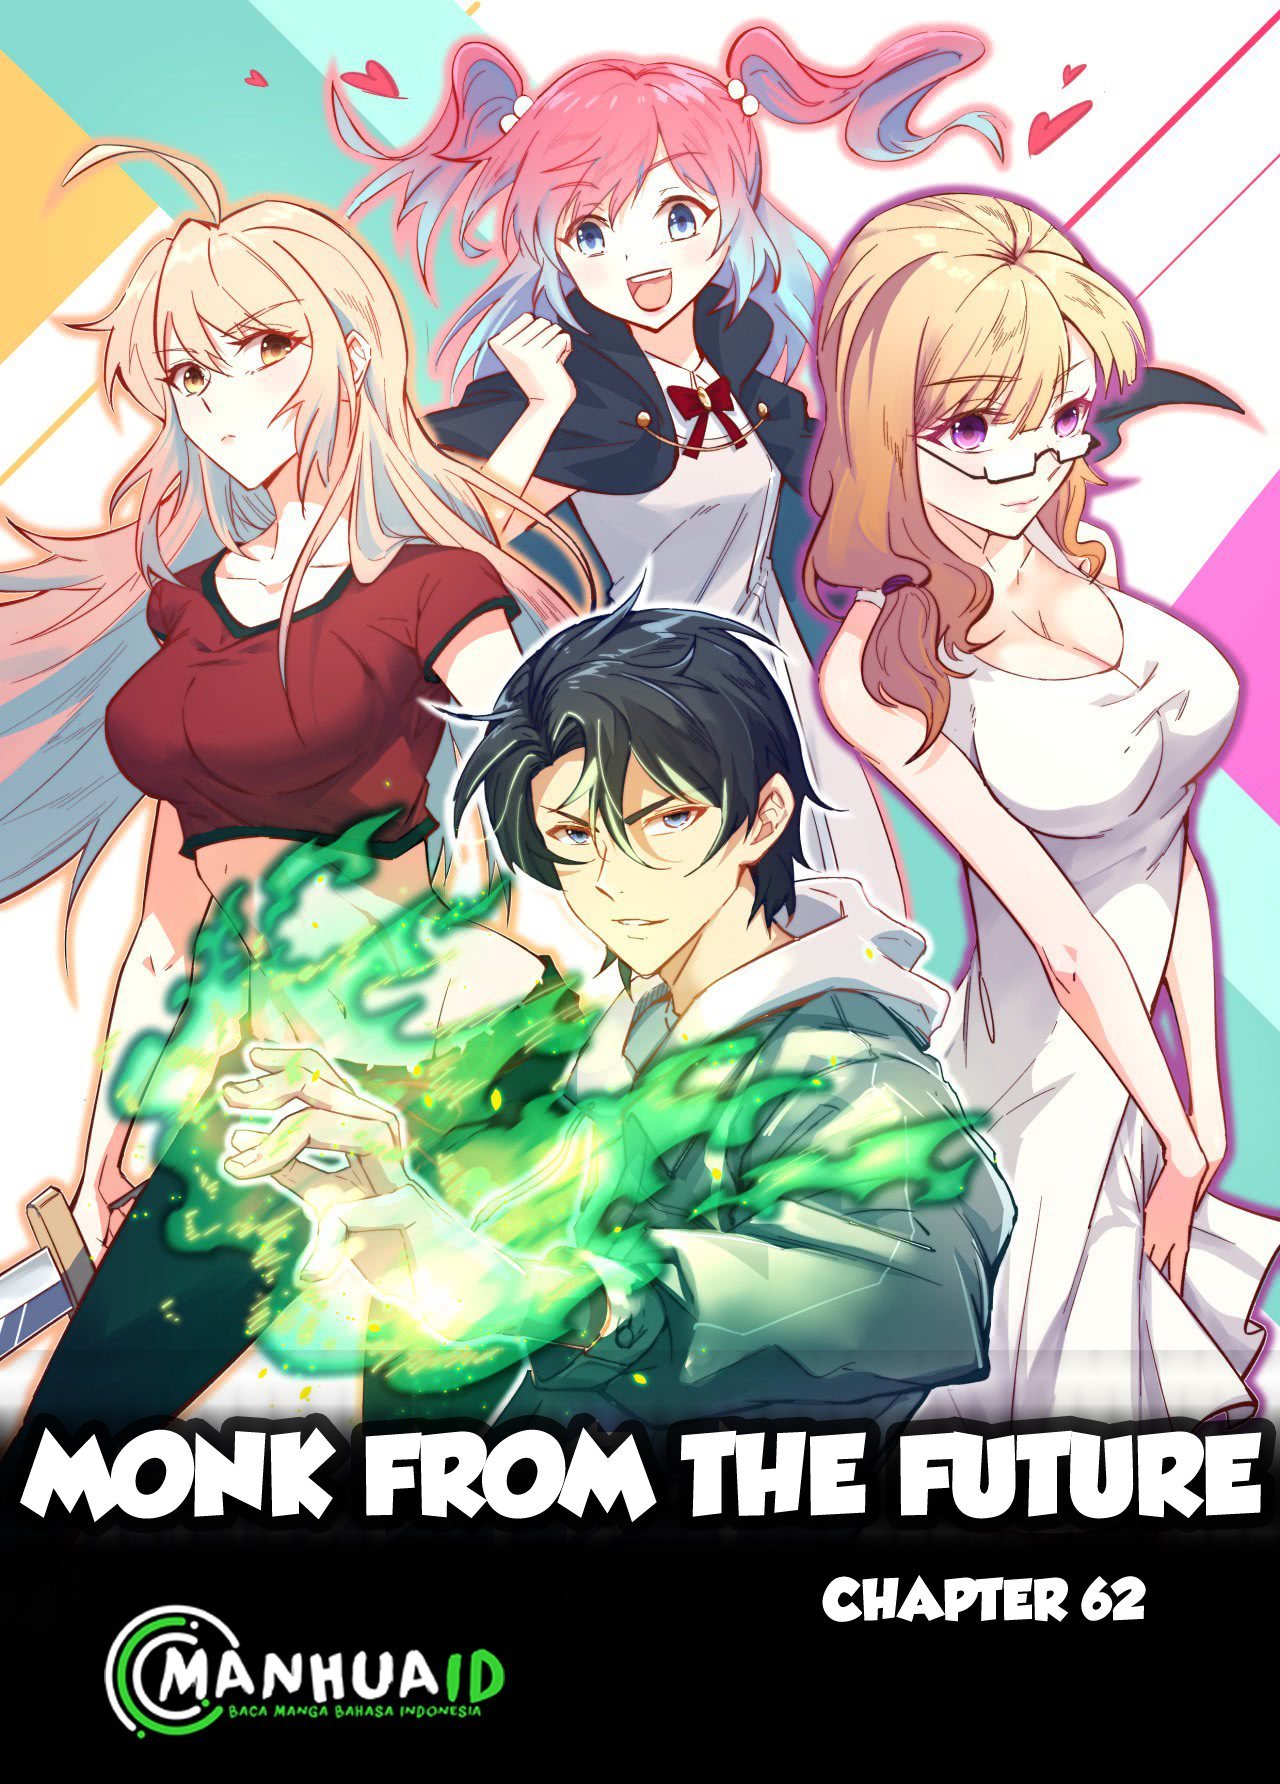 Monk From the Future Chapter 62